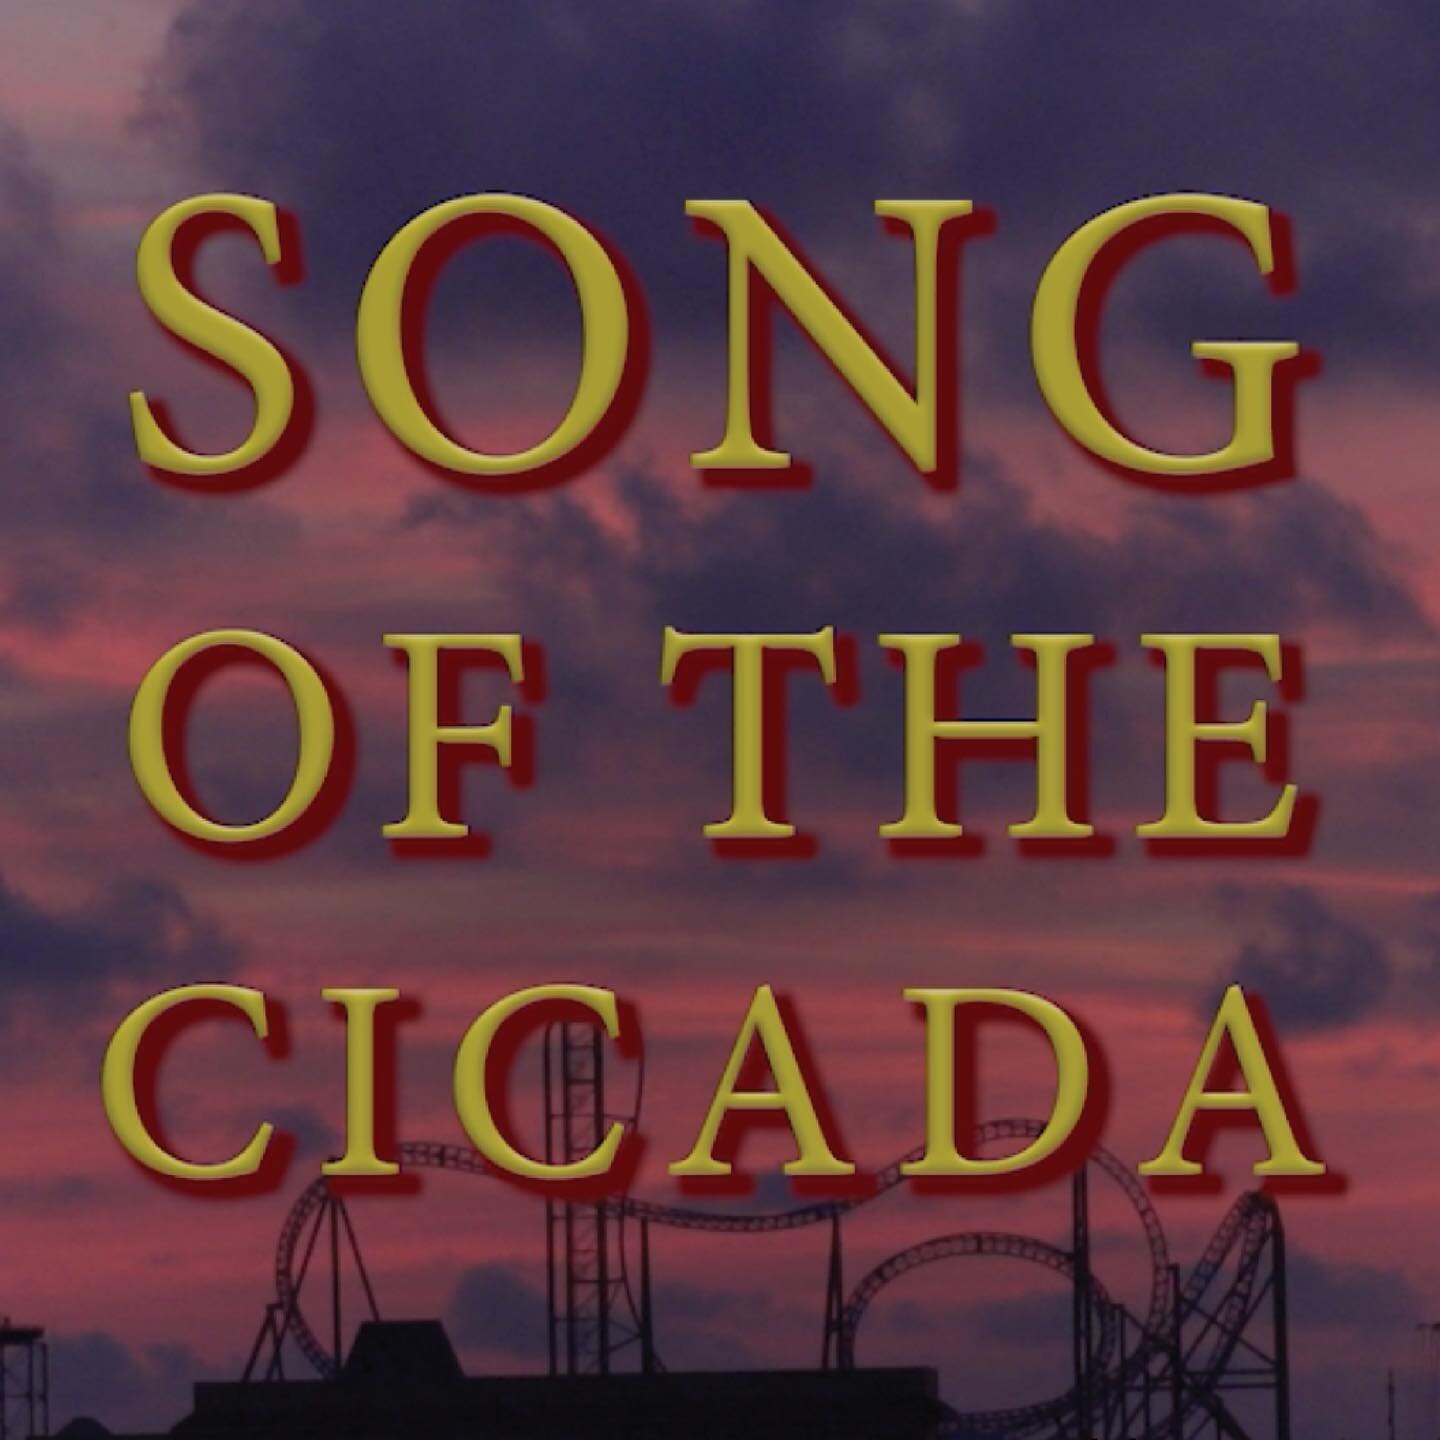 &ldquo;I had to know what was beyond.&rdquo; 

Song of the Cicada. A new documentary coming 2021. Subscribe for updates at the link in bio.